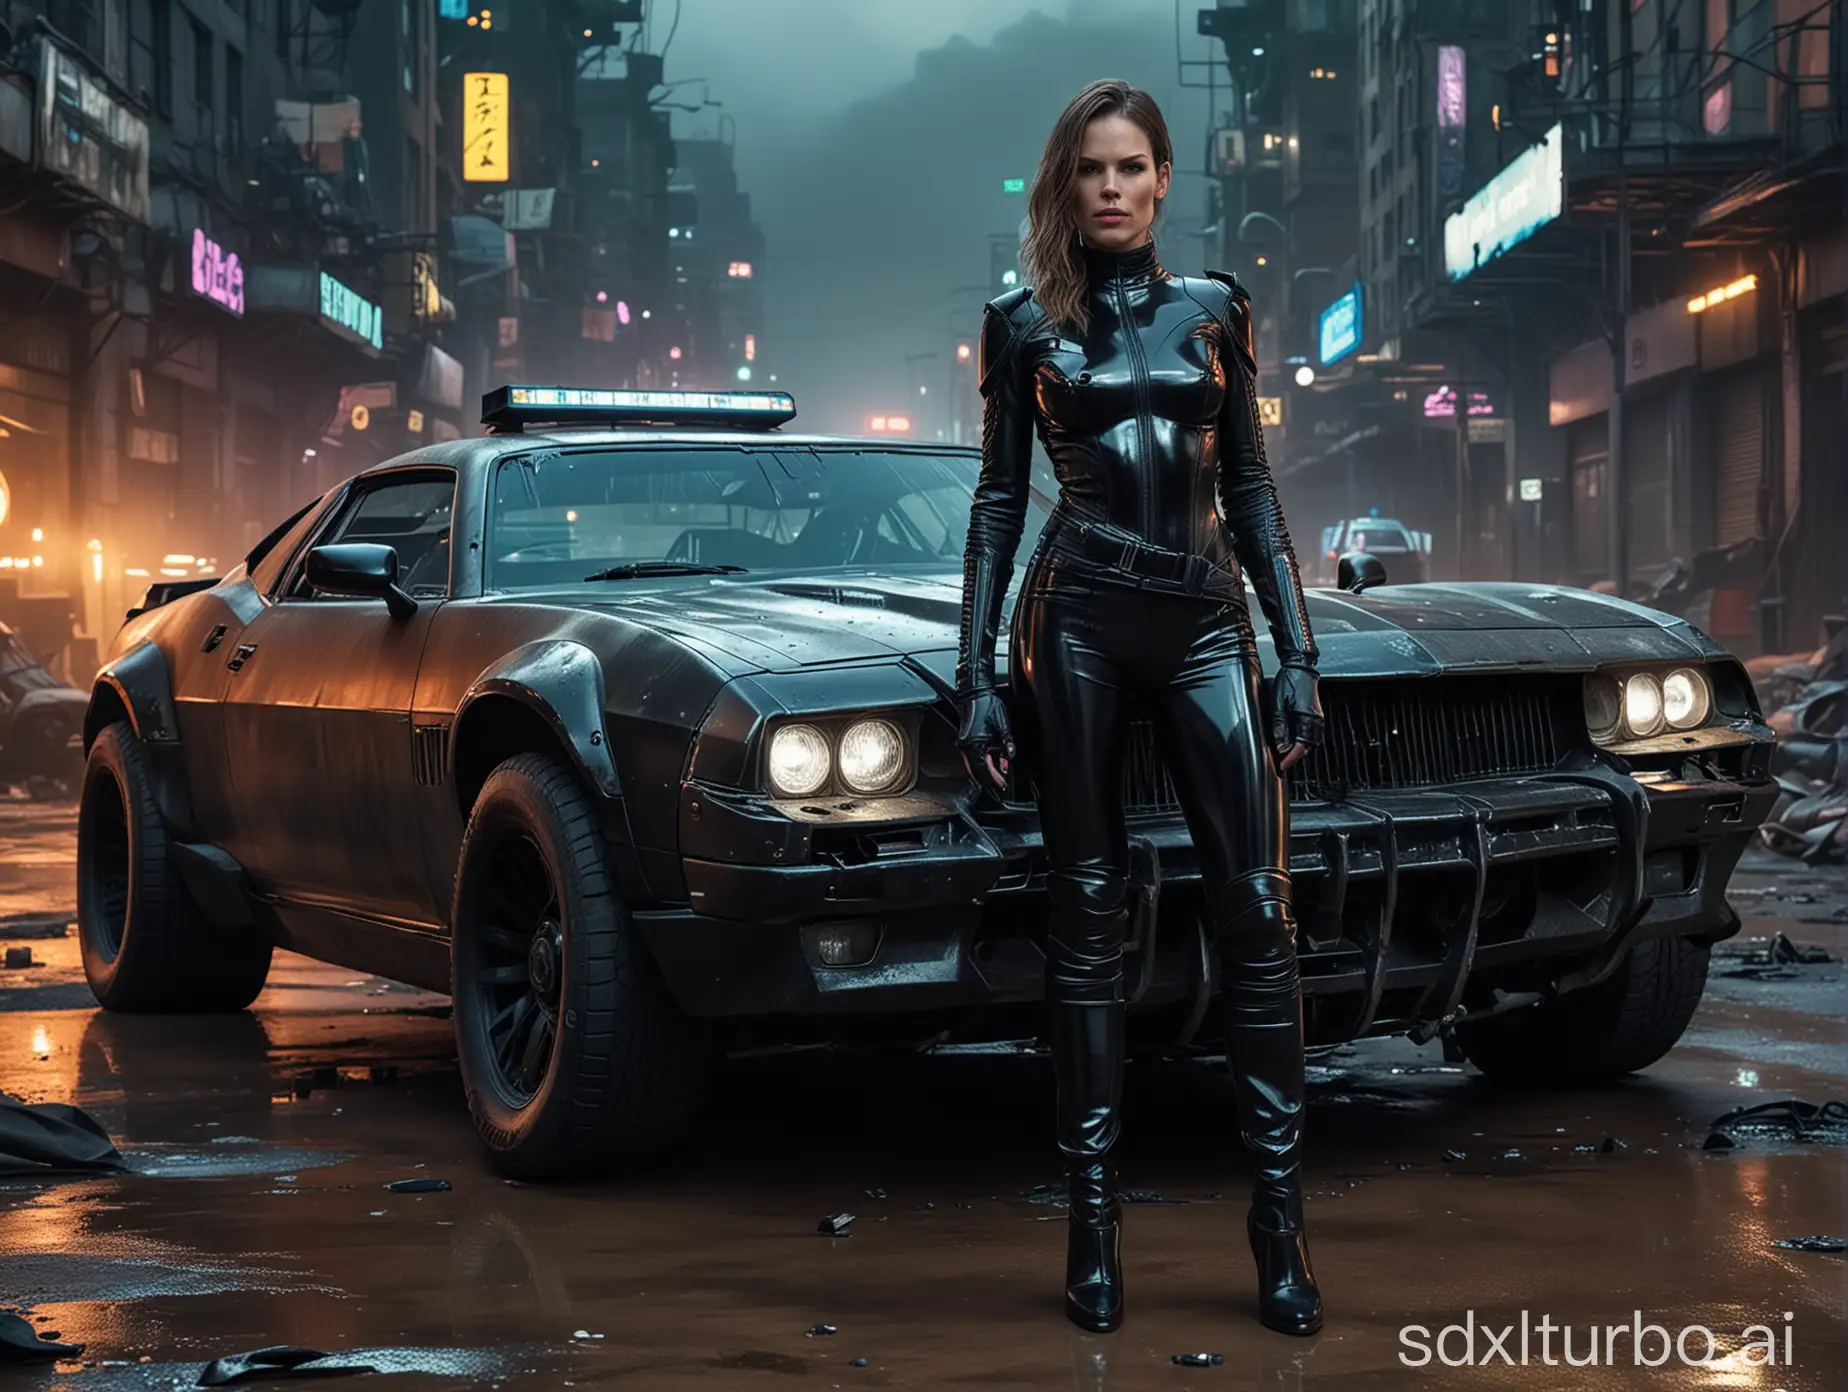 Cyberpunk-Police-Officer-Hilary-Swank-Stands-Amidst-Devastated-Cityscape